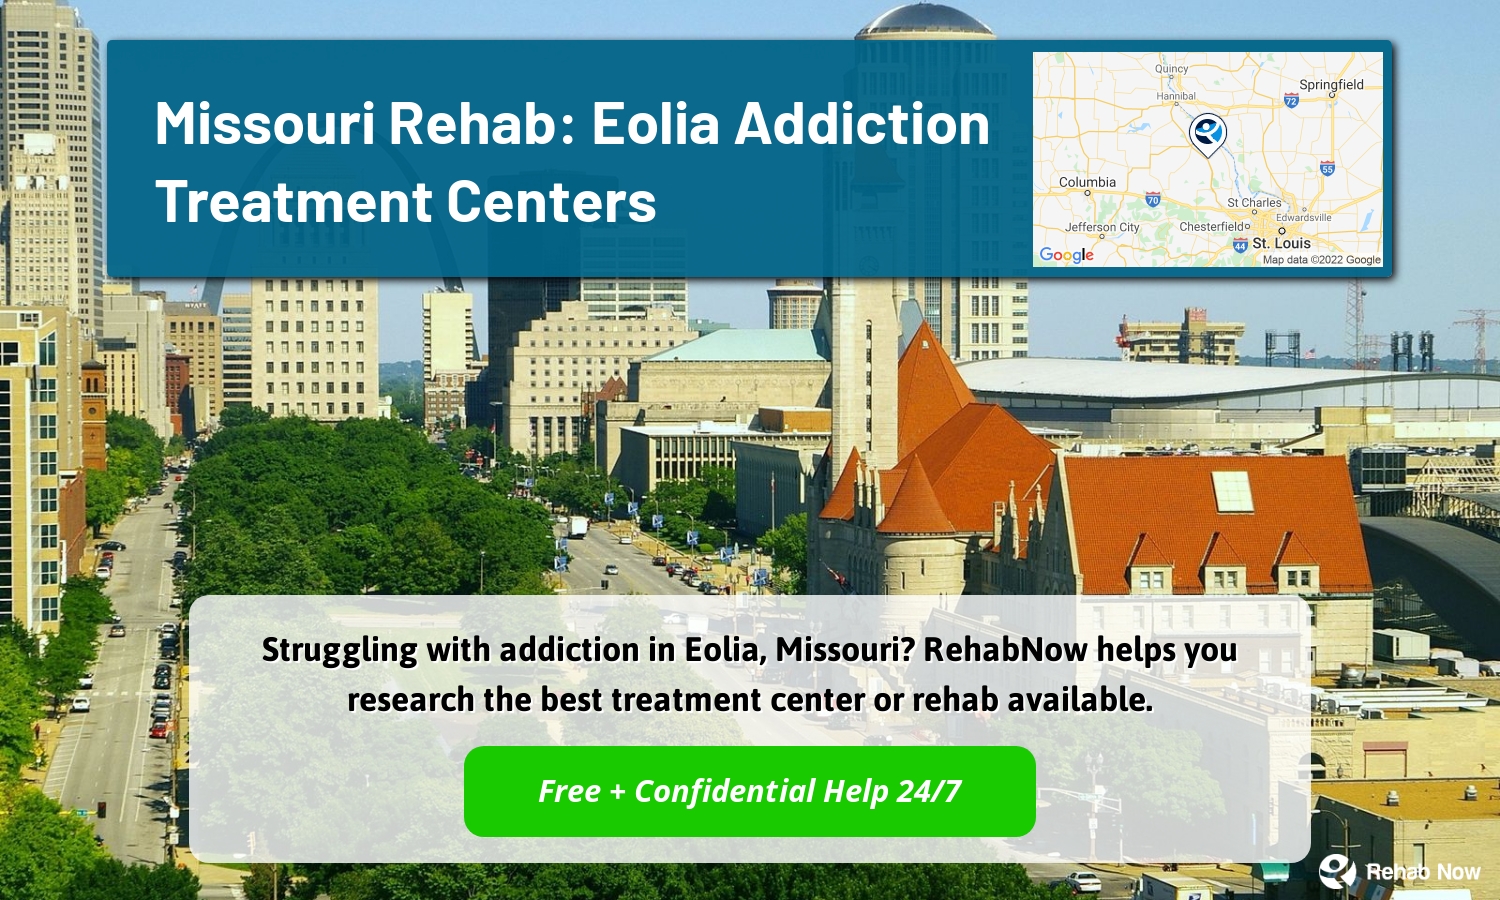 Struggling with addiction in Eolia, Missouri? RehabNow helps you research the best treatment center or rehab available.